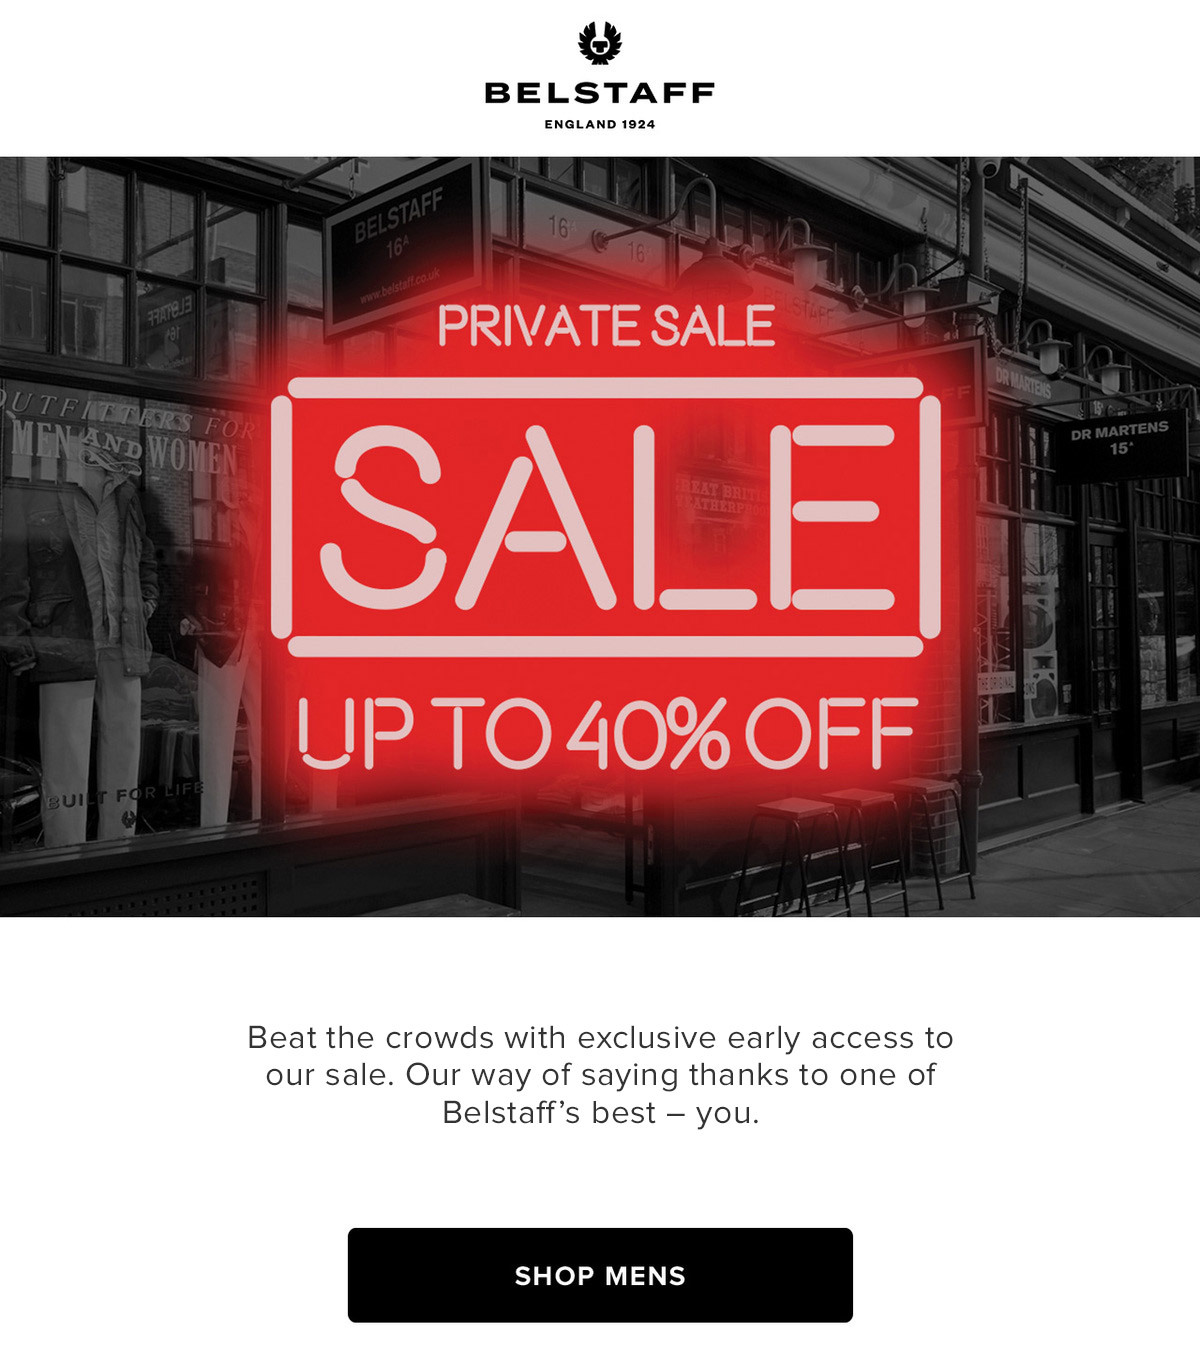 Private Sale - Up to 40% off